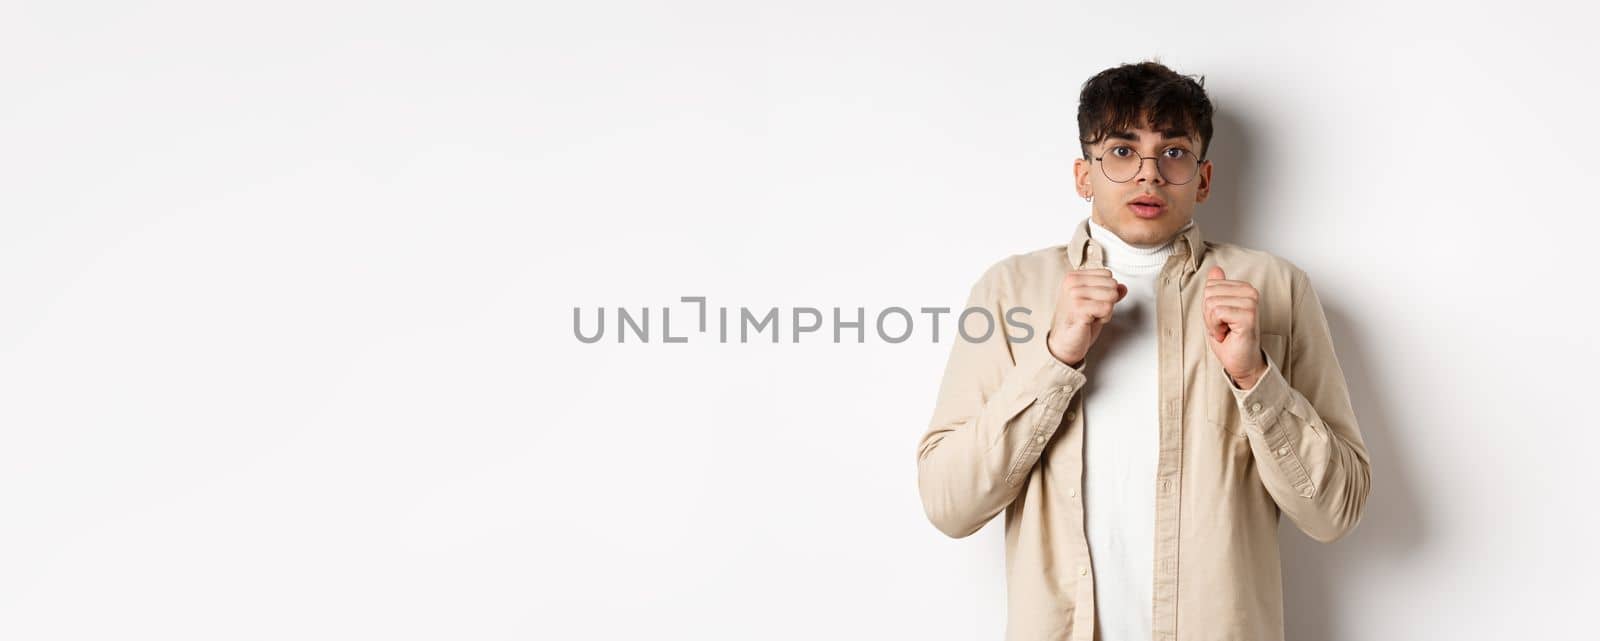 Startled man freeze from fear, gasping and looking scared at camera, standing in glasses on white background.